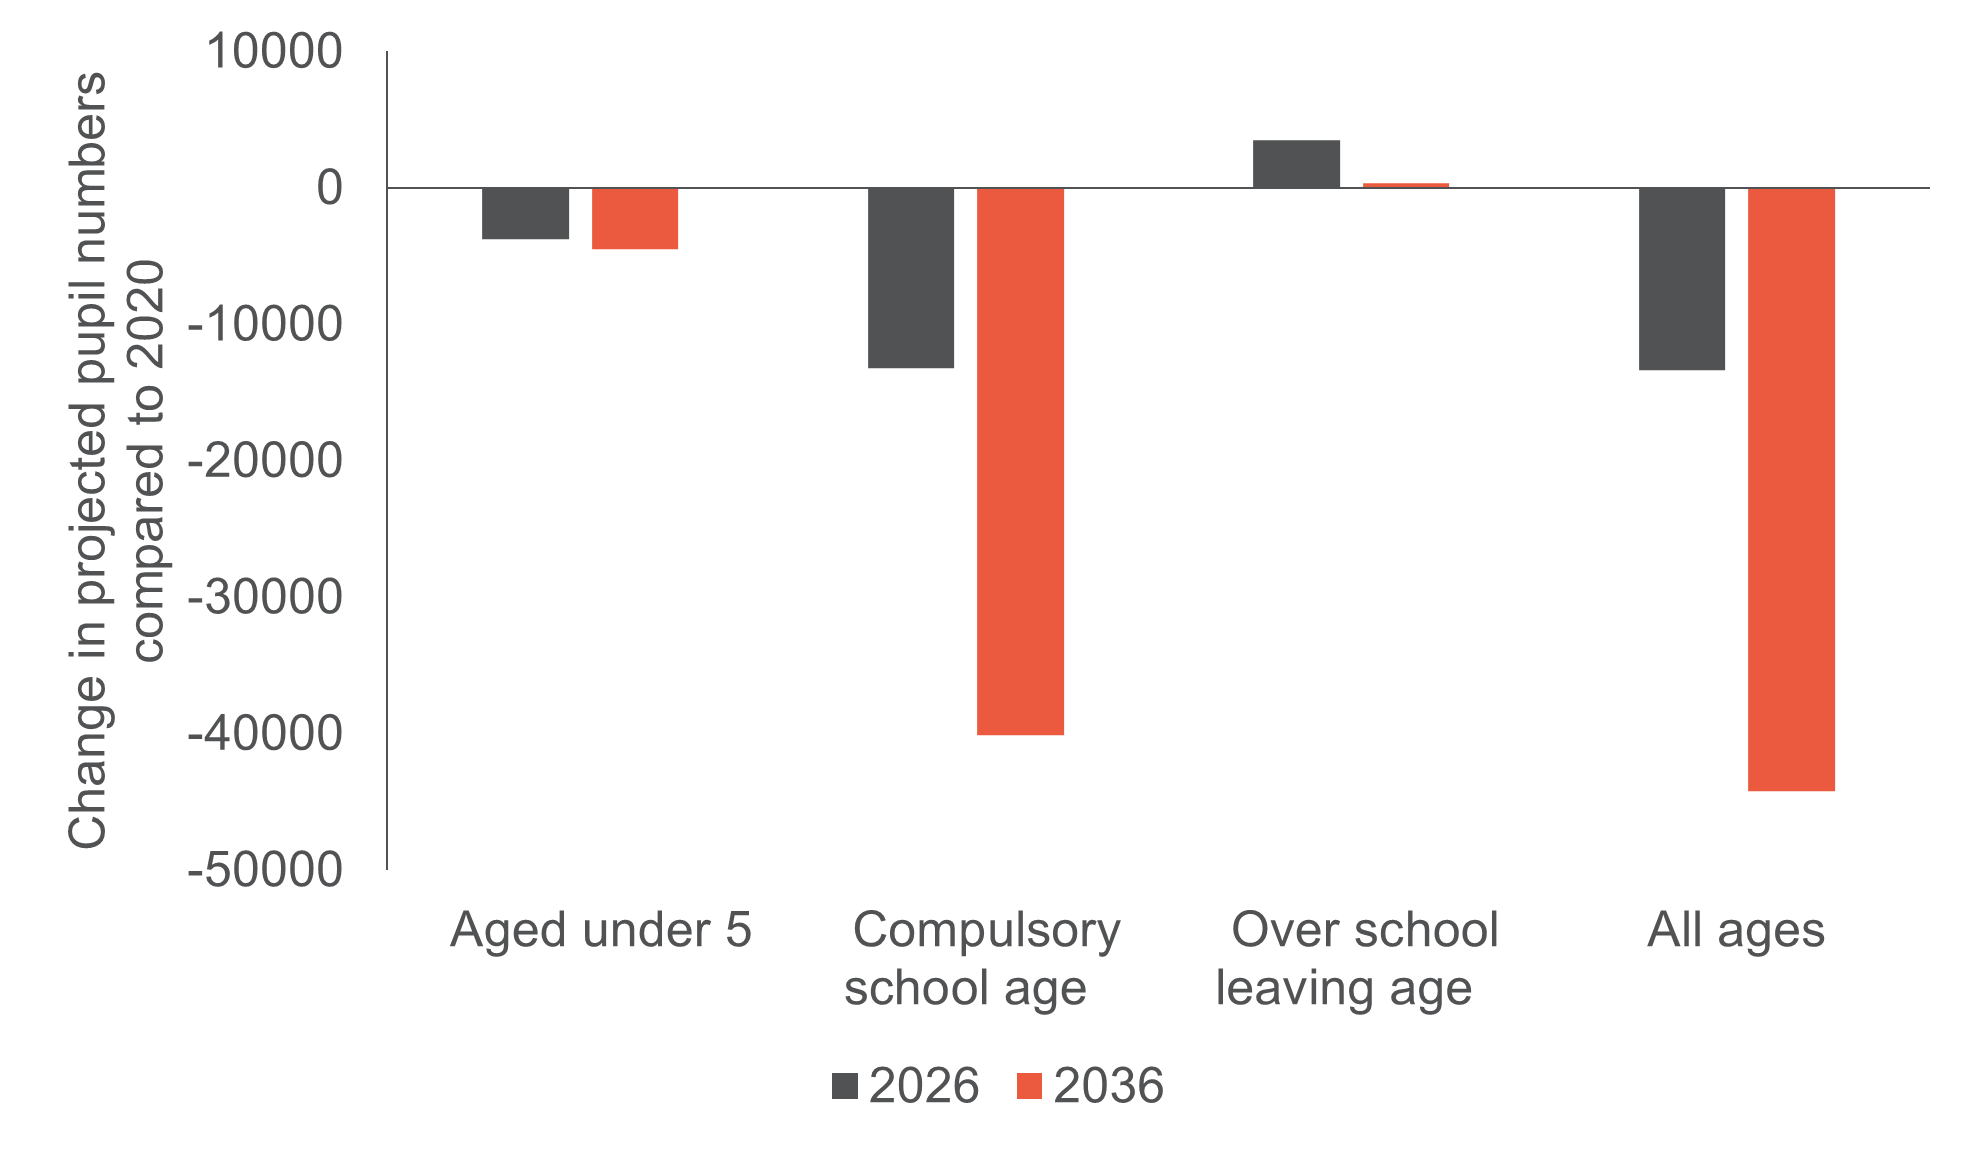 Bar chart predicting a decline in pupil numbers over the next 15 years.